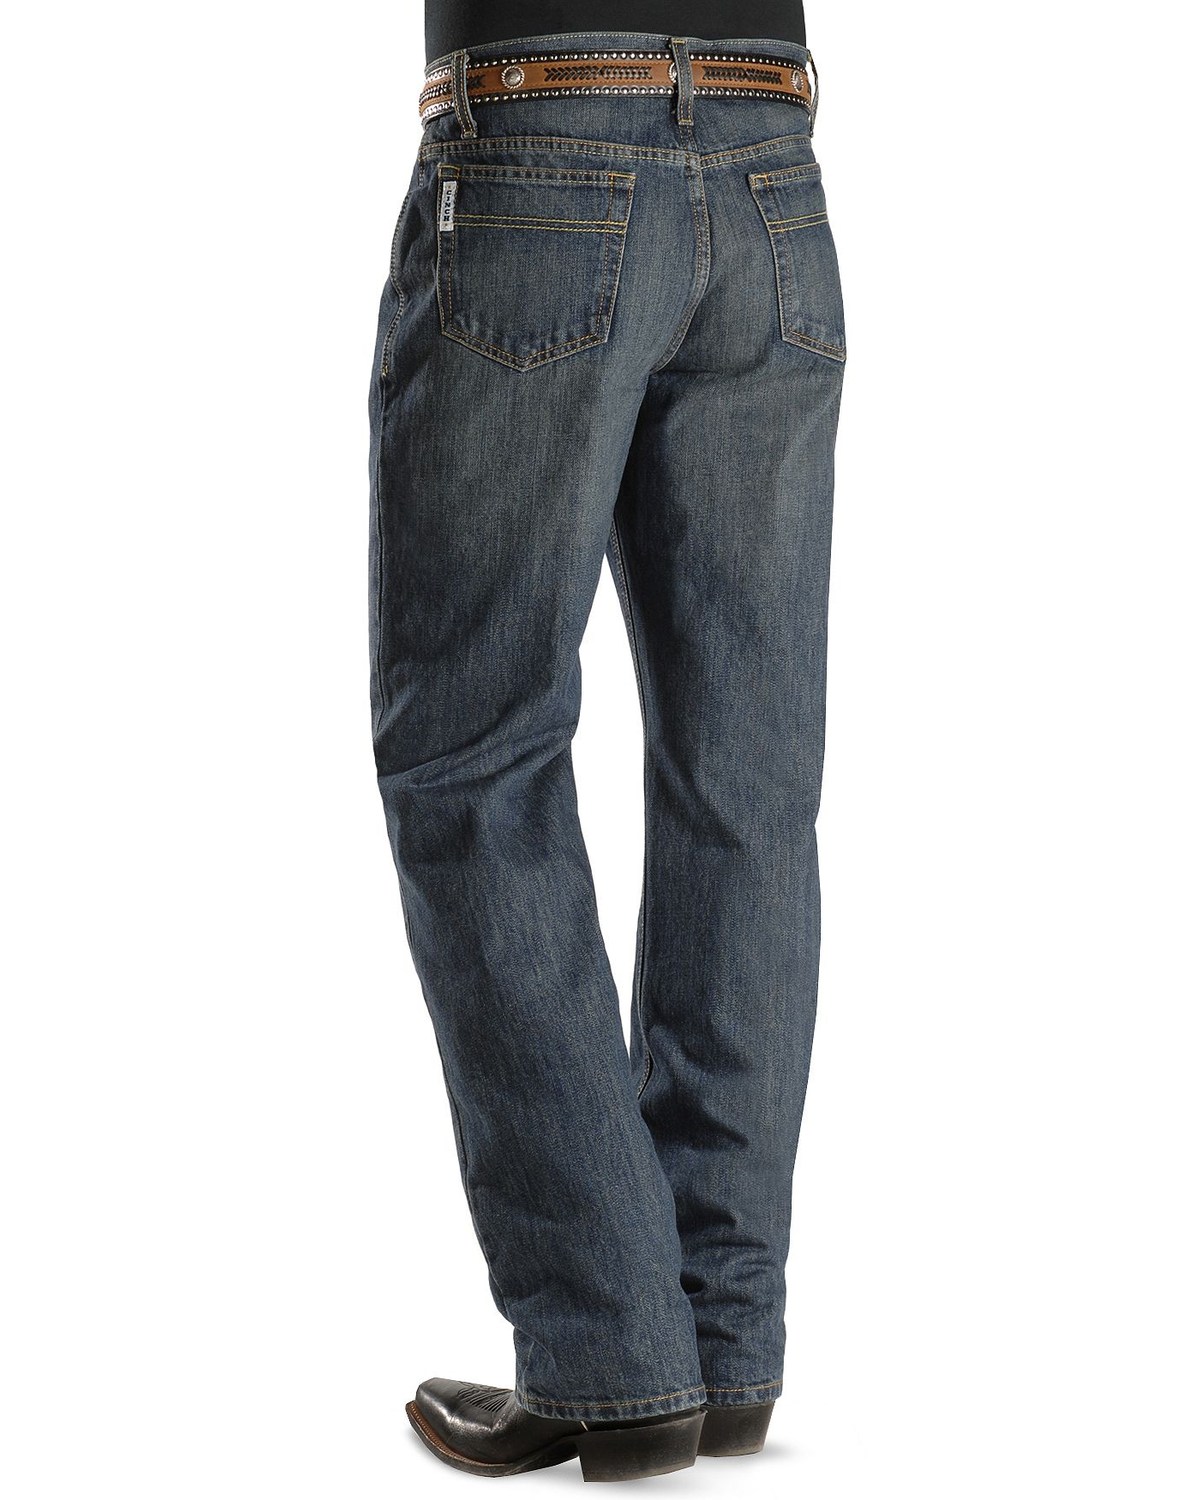 Cinch Jeans - White Label Relaxed Fit 38" & 40" Tall Inseams